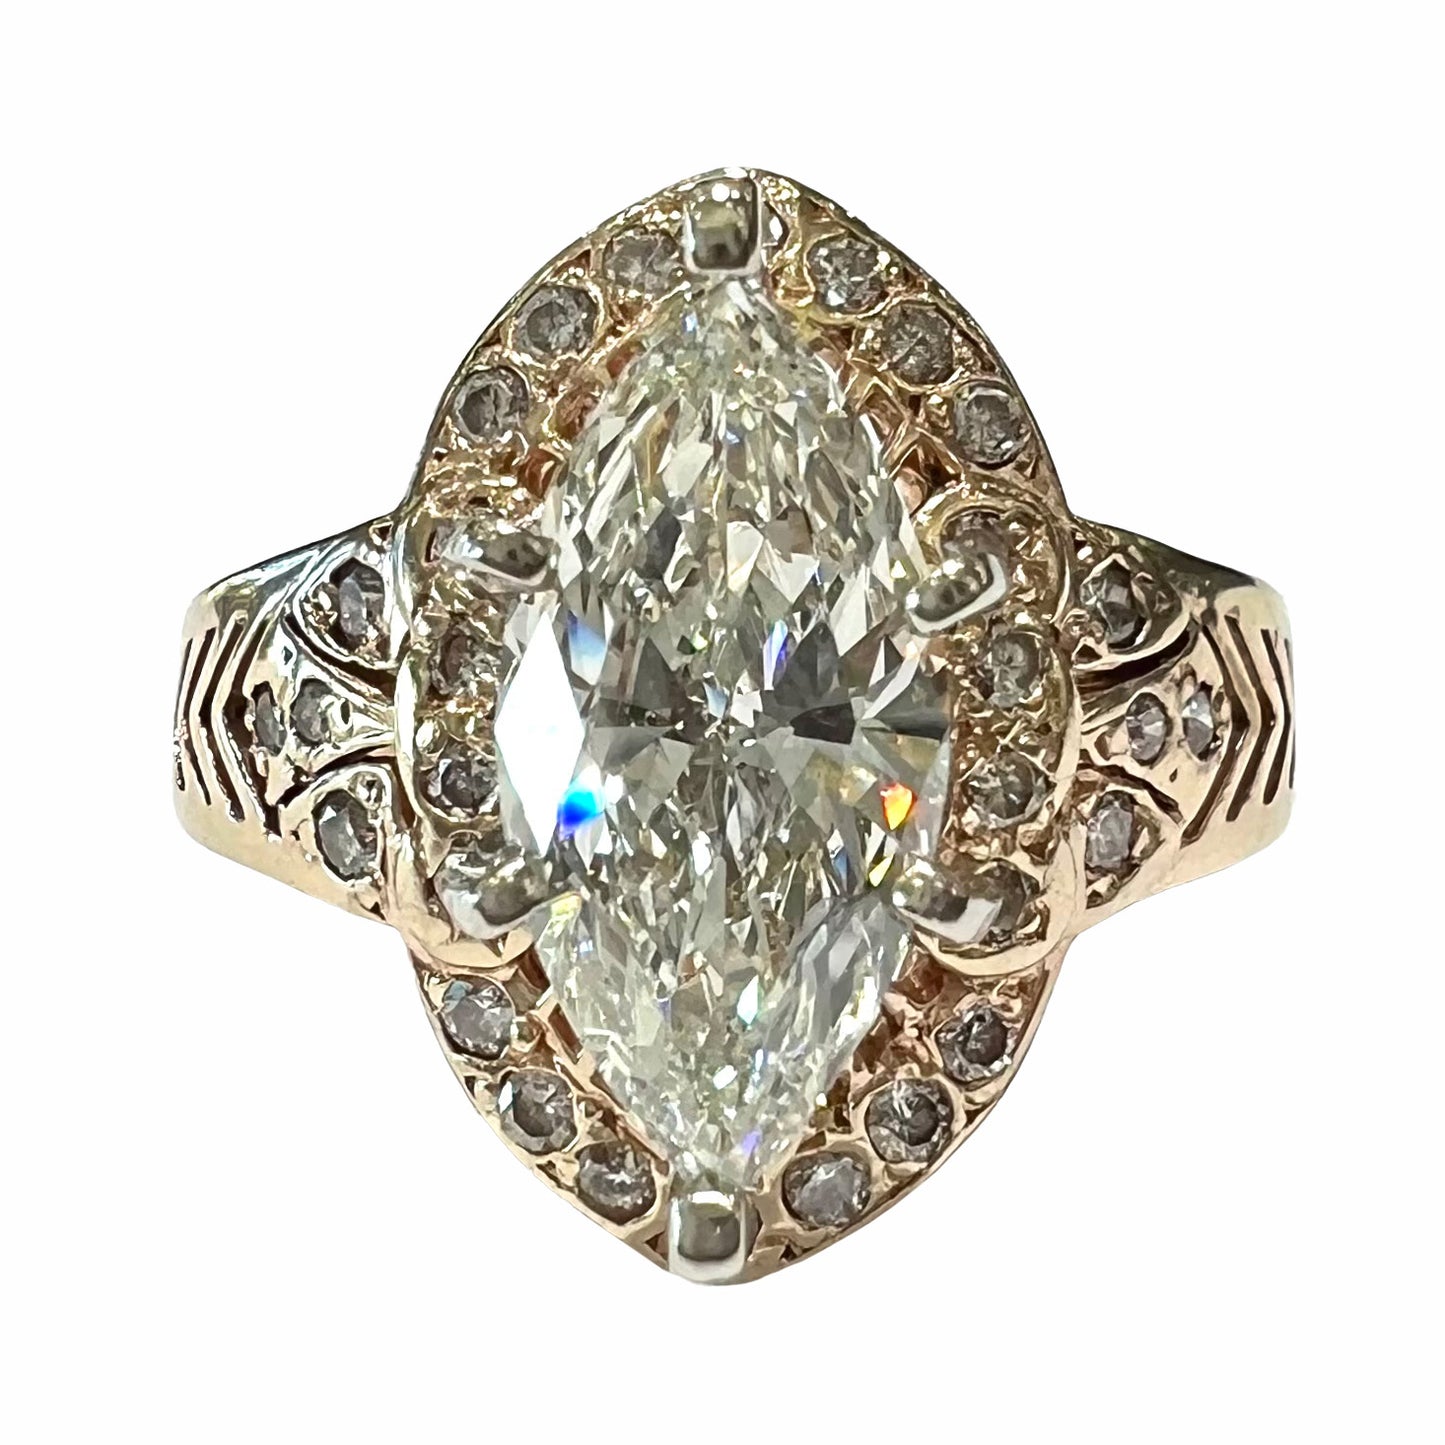 A ladies' yellow gold engagement ring set with a 1.54ct marquise cut natural diamond with round diamond accents.